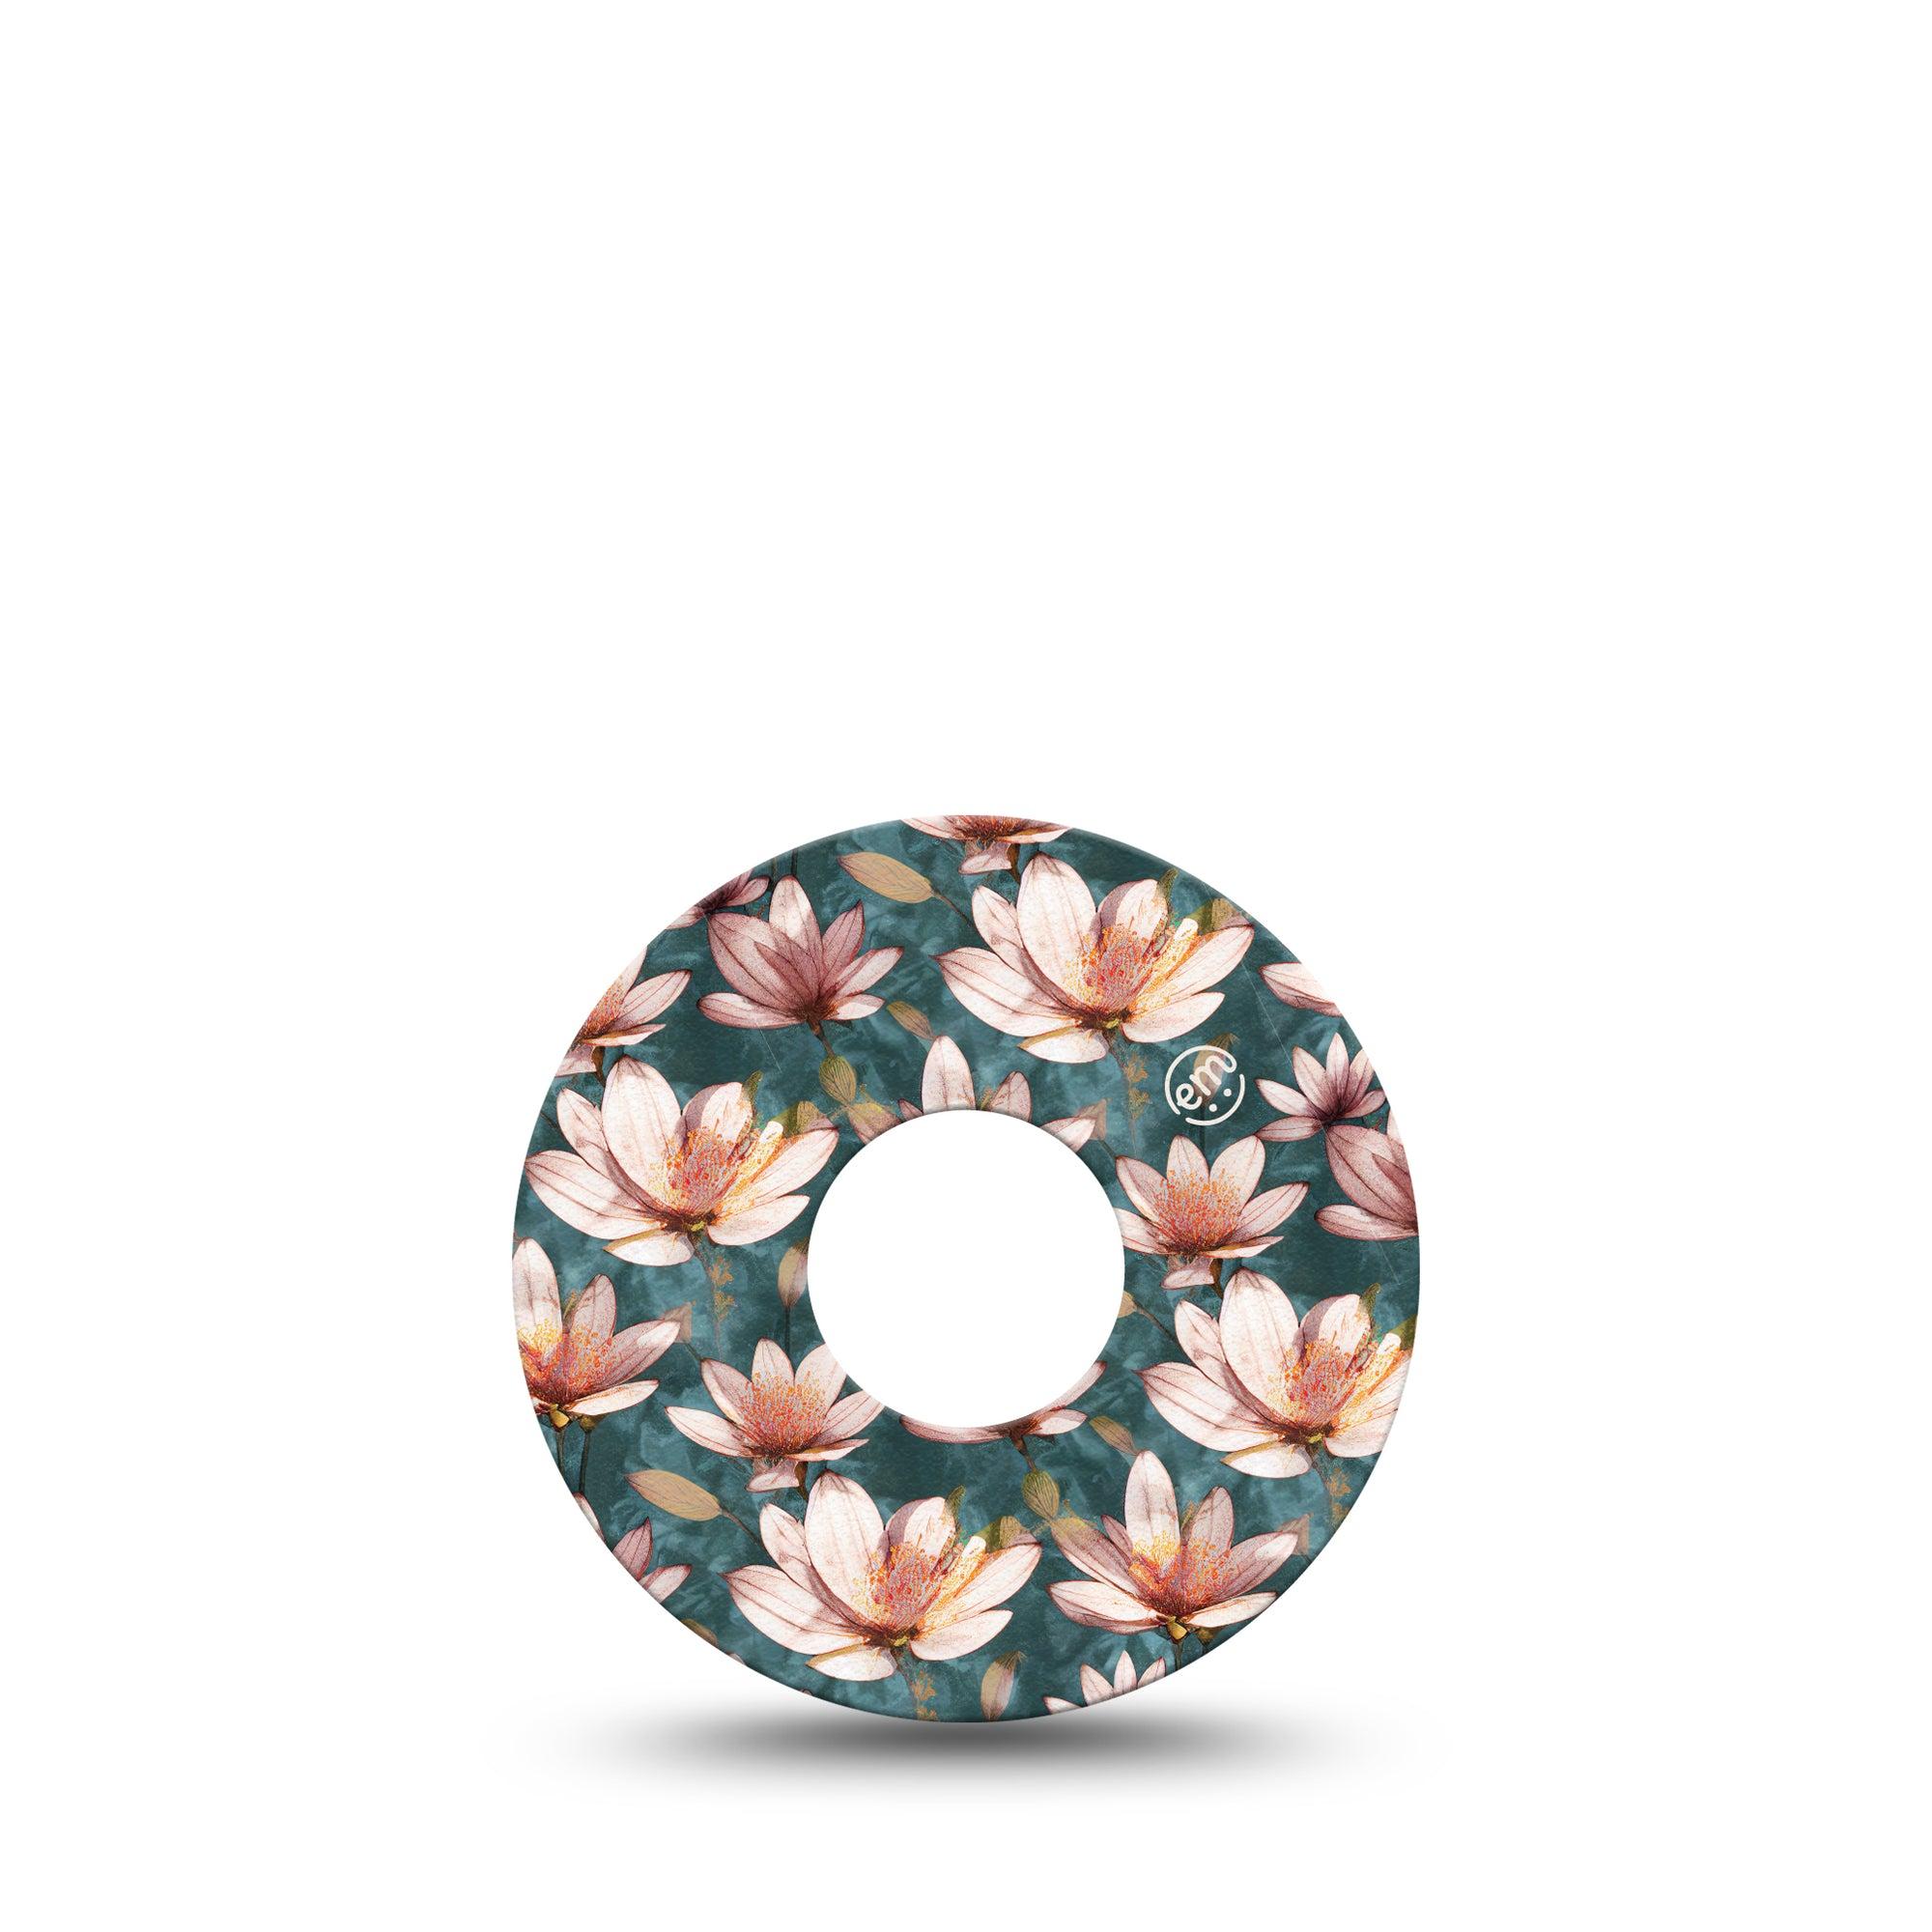 ExpressionMed Magnolia Libre 3 Tape, Single, Ornamental Florals Inspired, CGM Overlay Patch Design